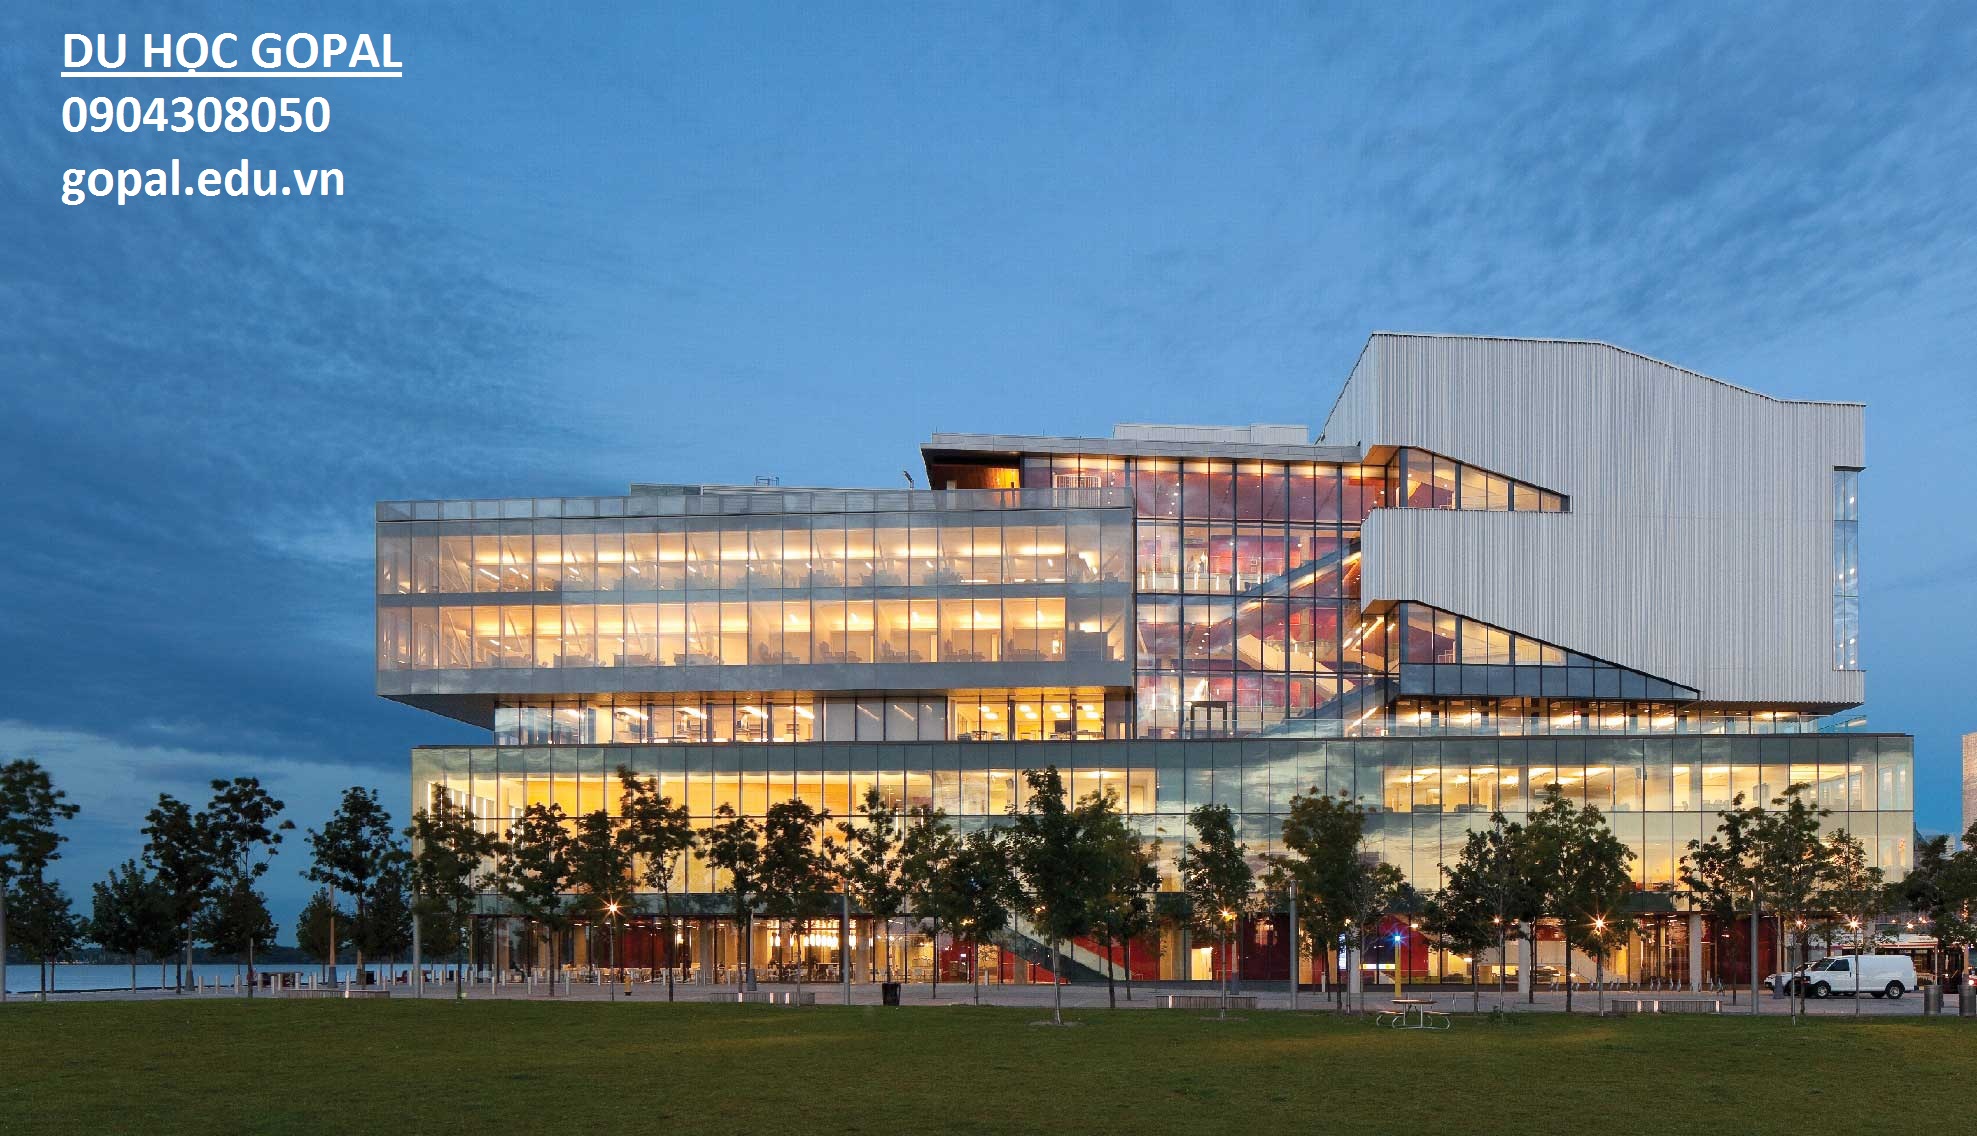 GEORGE BROWN COLLEGE- CANADA